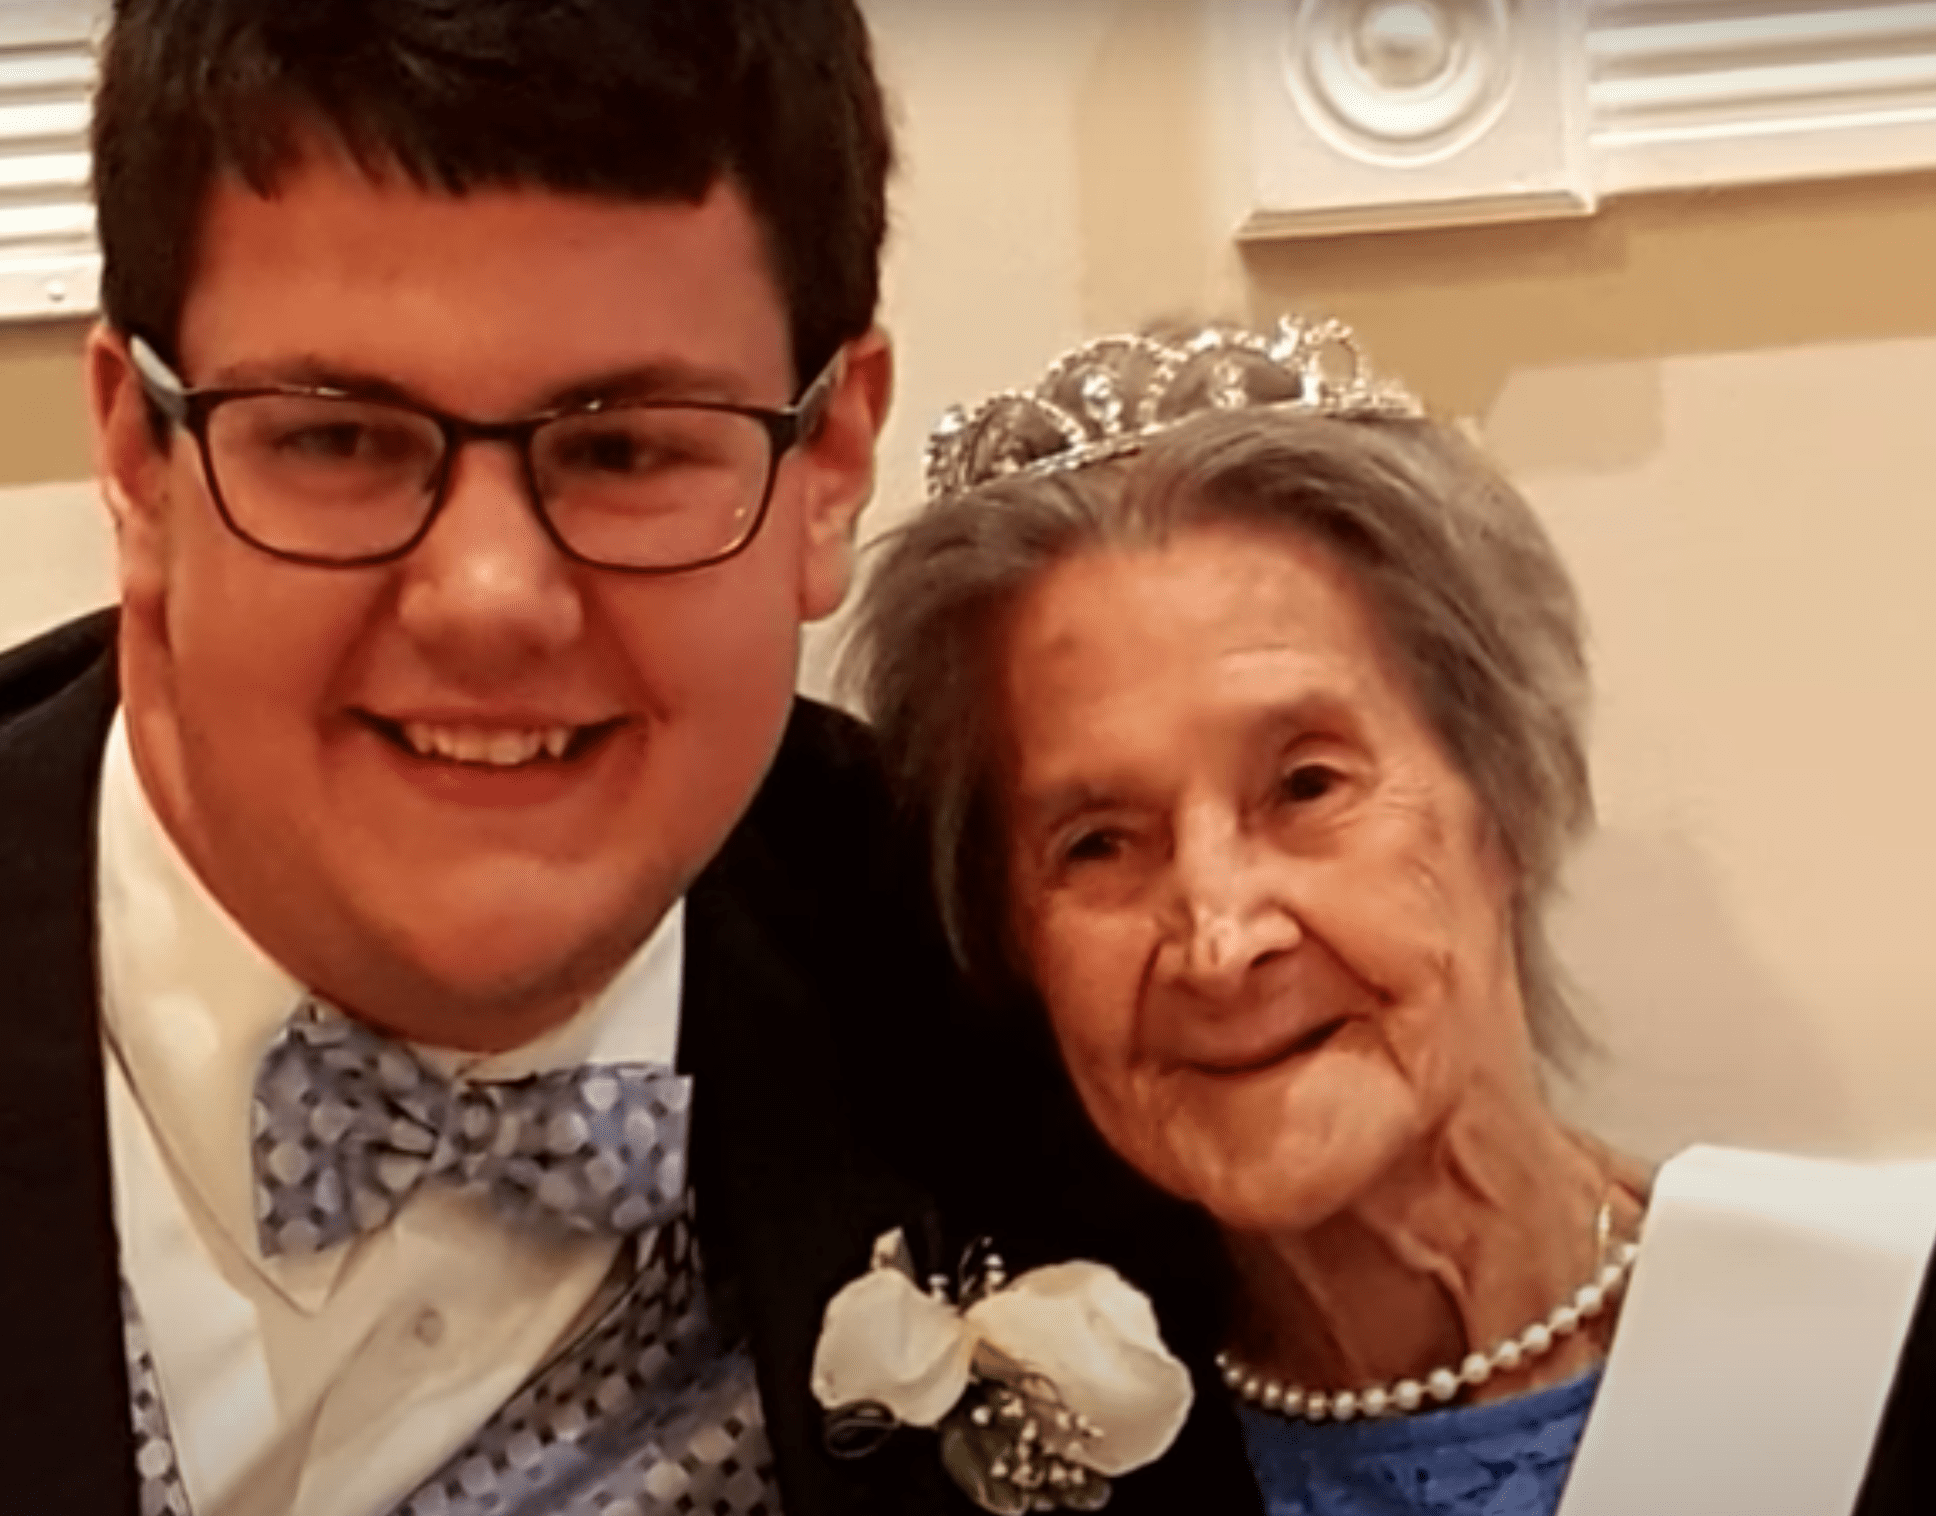 A young student takes his grandmother to prom | Photo: Youtube/Inside Edition